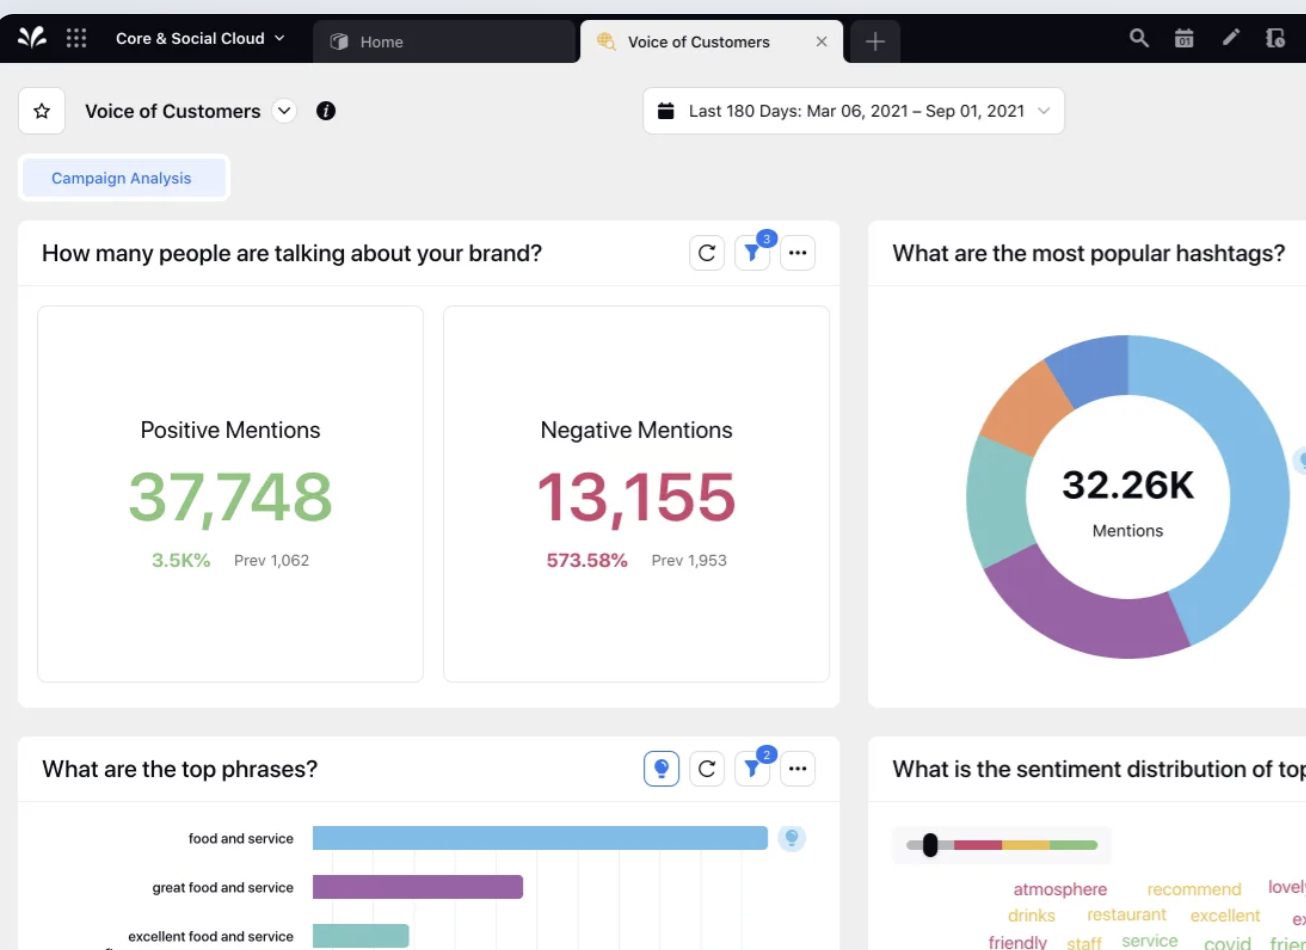 Sprinklr’s social media listening tool that displays insights about how people perceive a particular brand across different social platforms